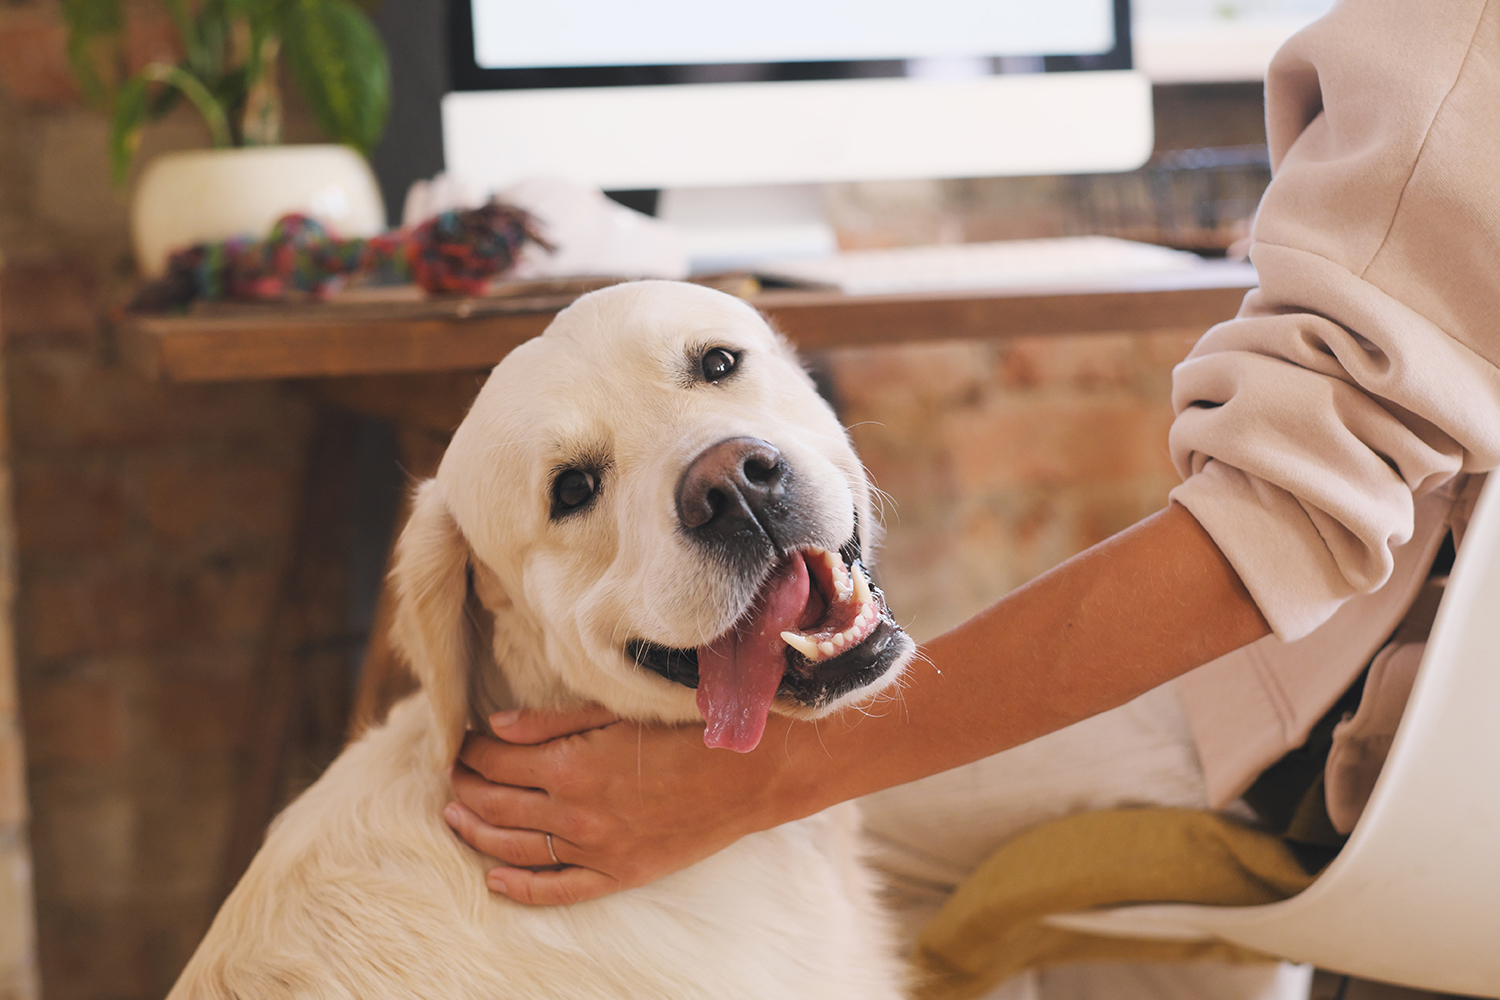 5 Easy Ways to Make Your Home More Pet-Friendly